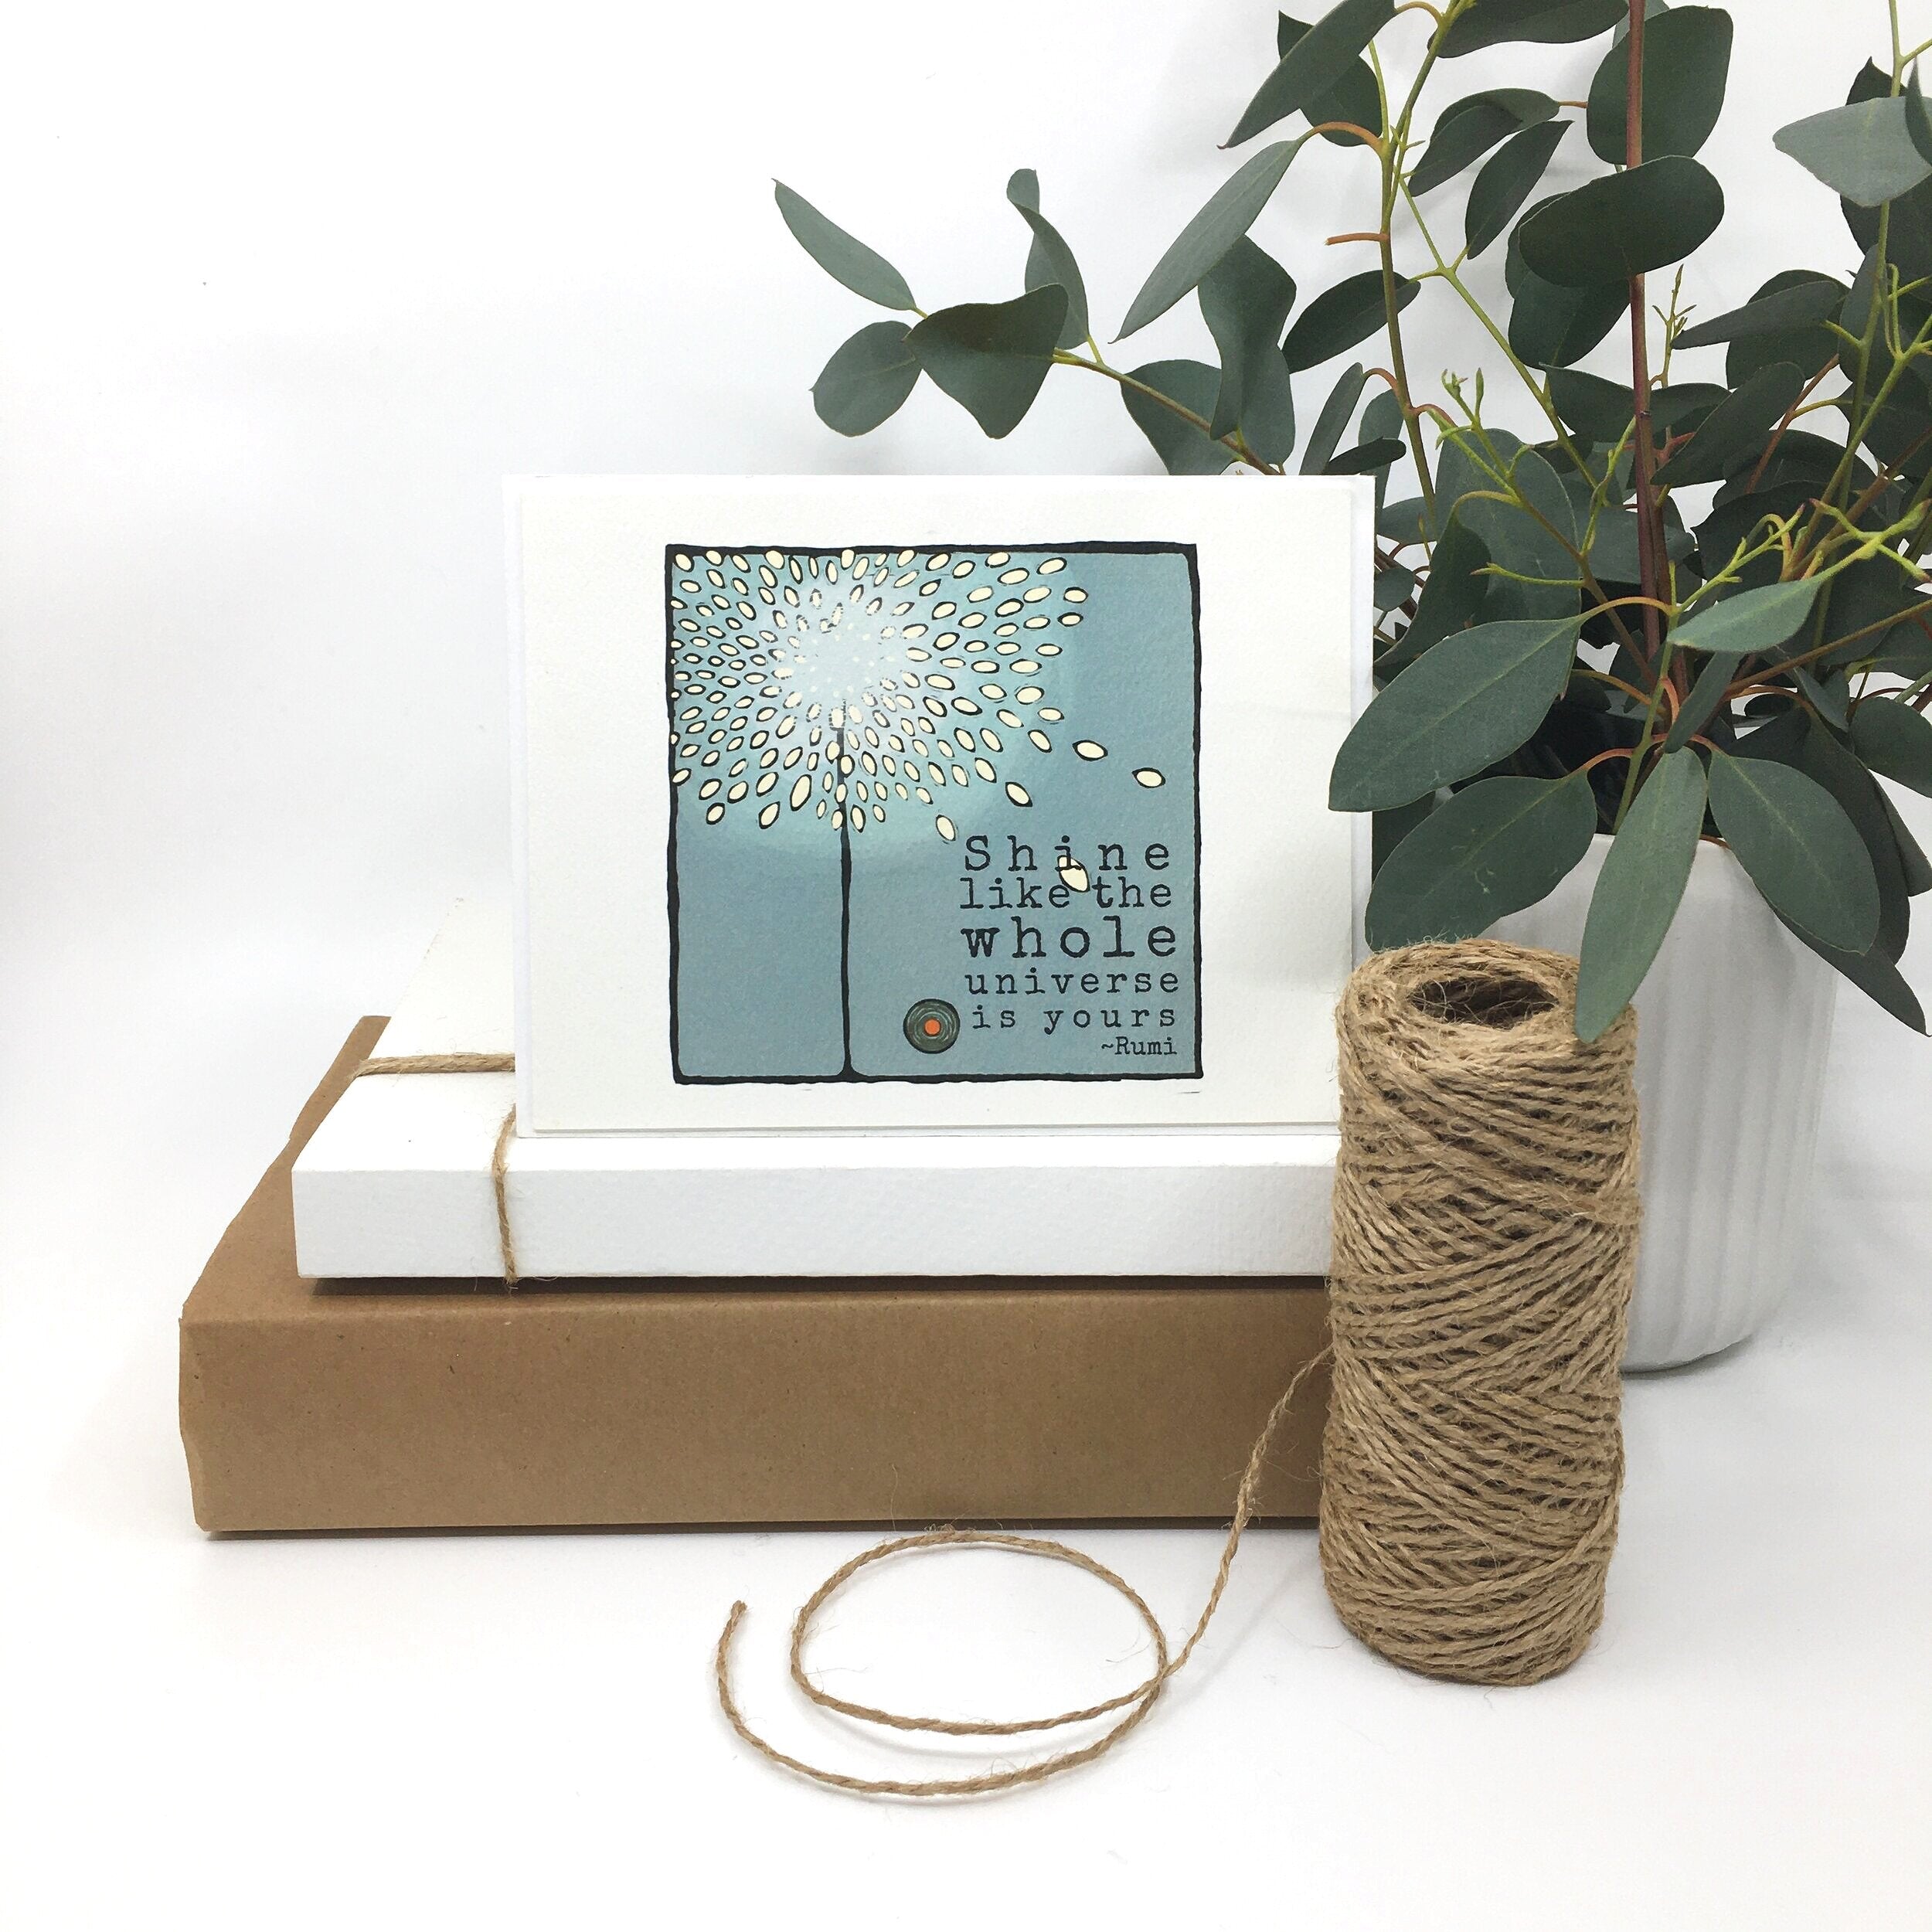 shine like the whole universe quote card sits on two paper boxes besides a roll of twine and a potted plant